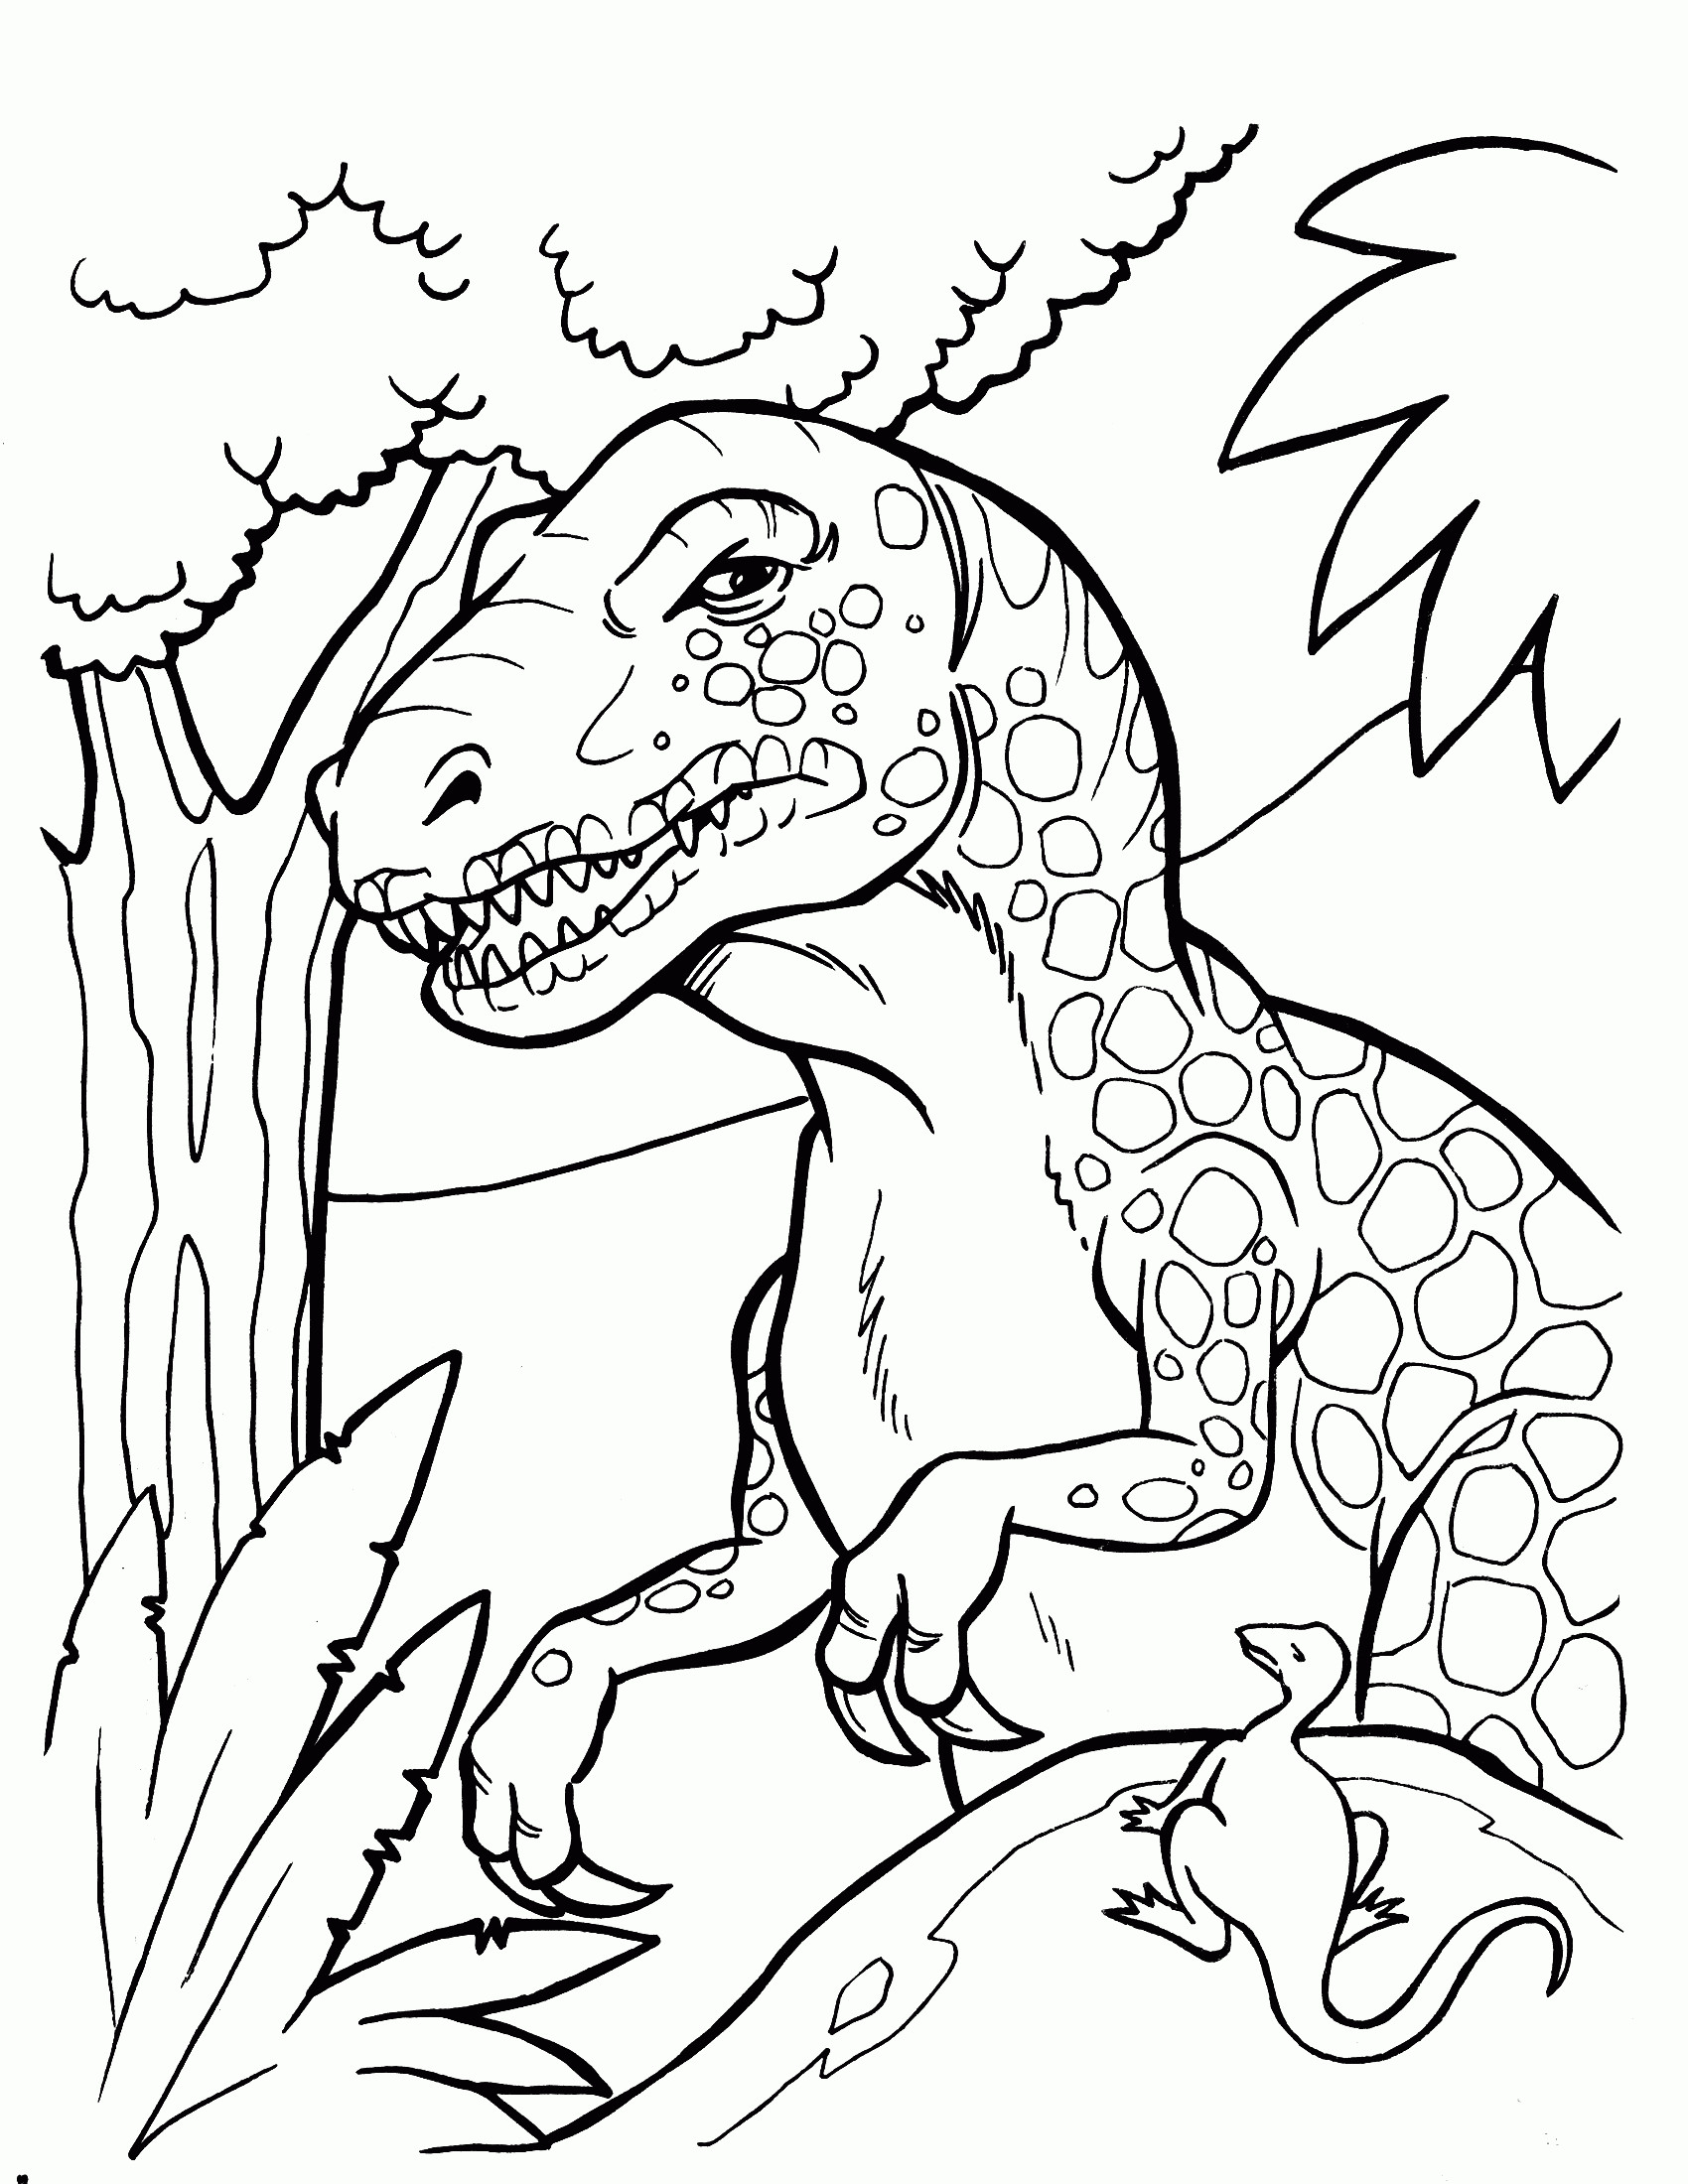 Dinosaur Coloring Pages For Kids
 Free Dinosaur Printable Coloring Pages Coloring Home